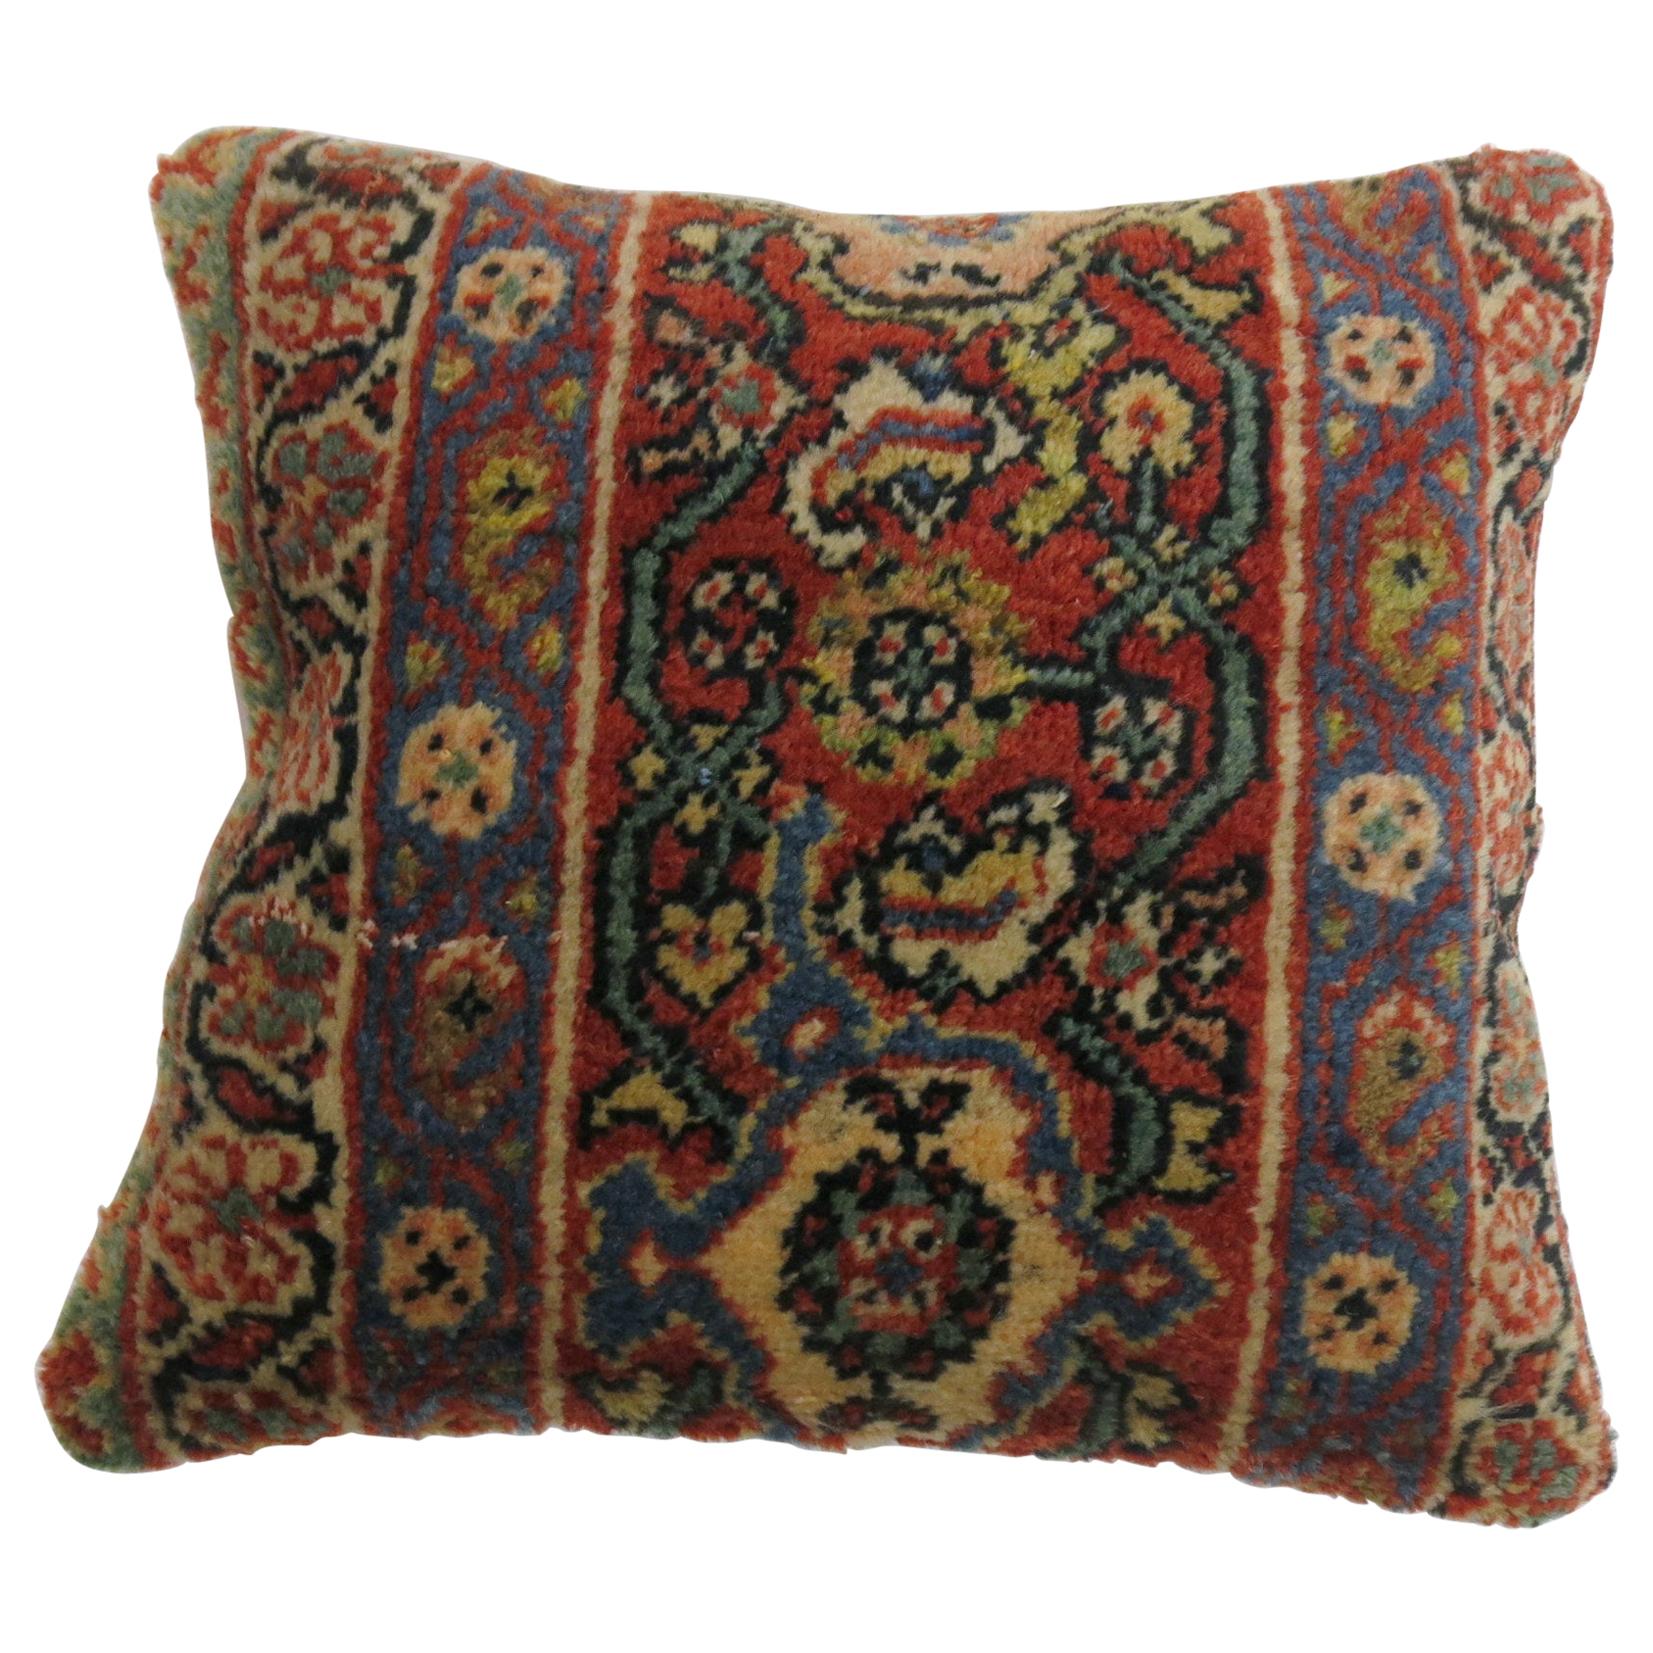 Antique Border Persian Rug Pillow in Red White and Blue